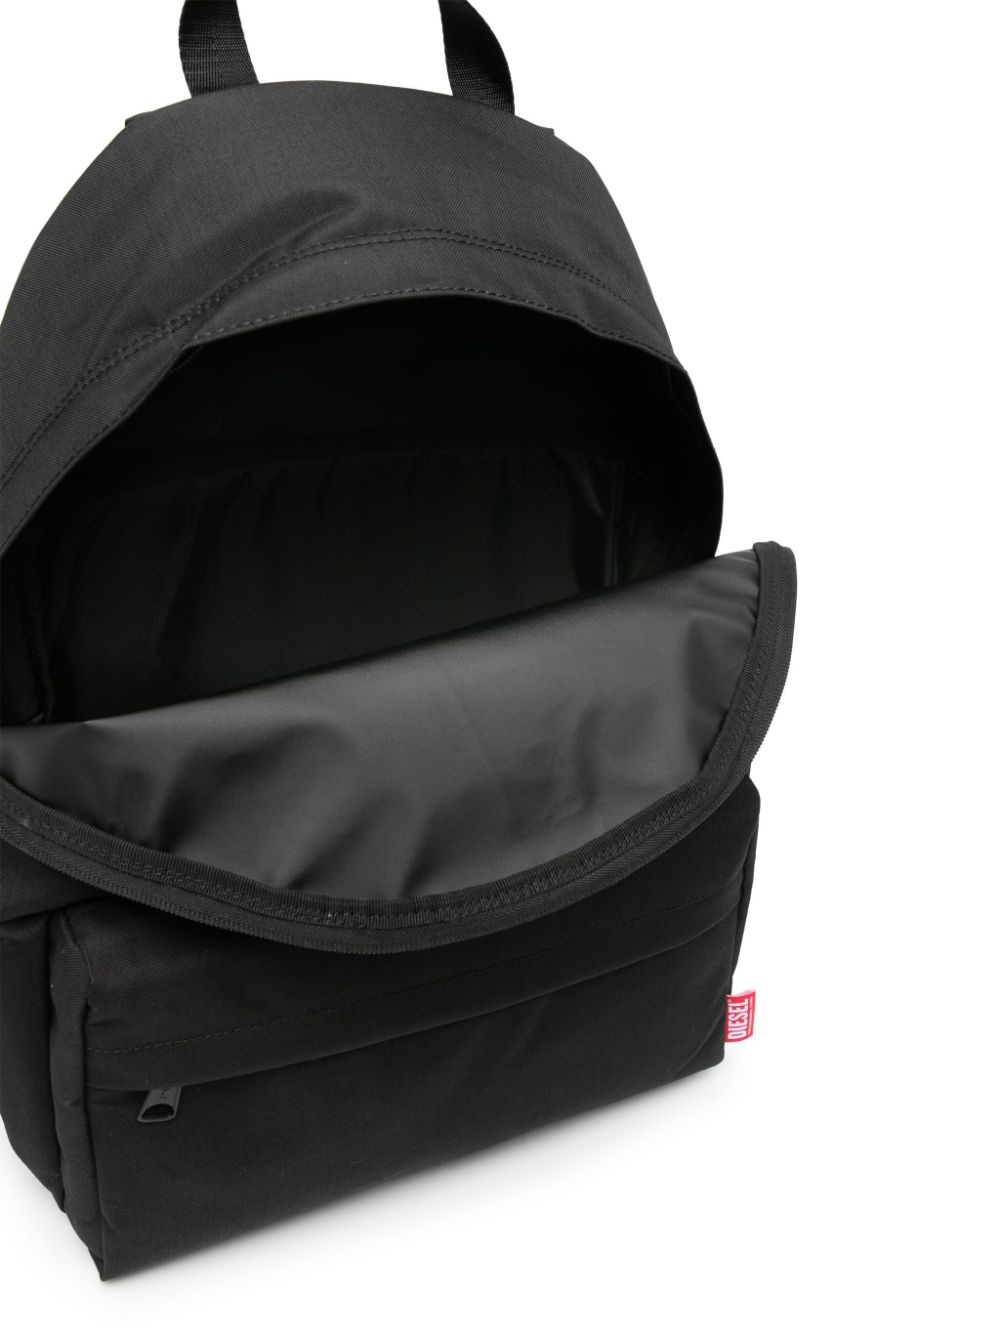 D-BSC backpack - 5